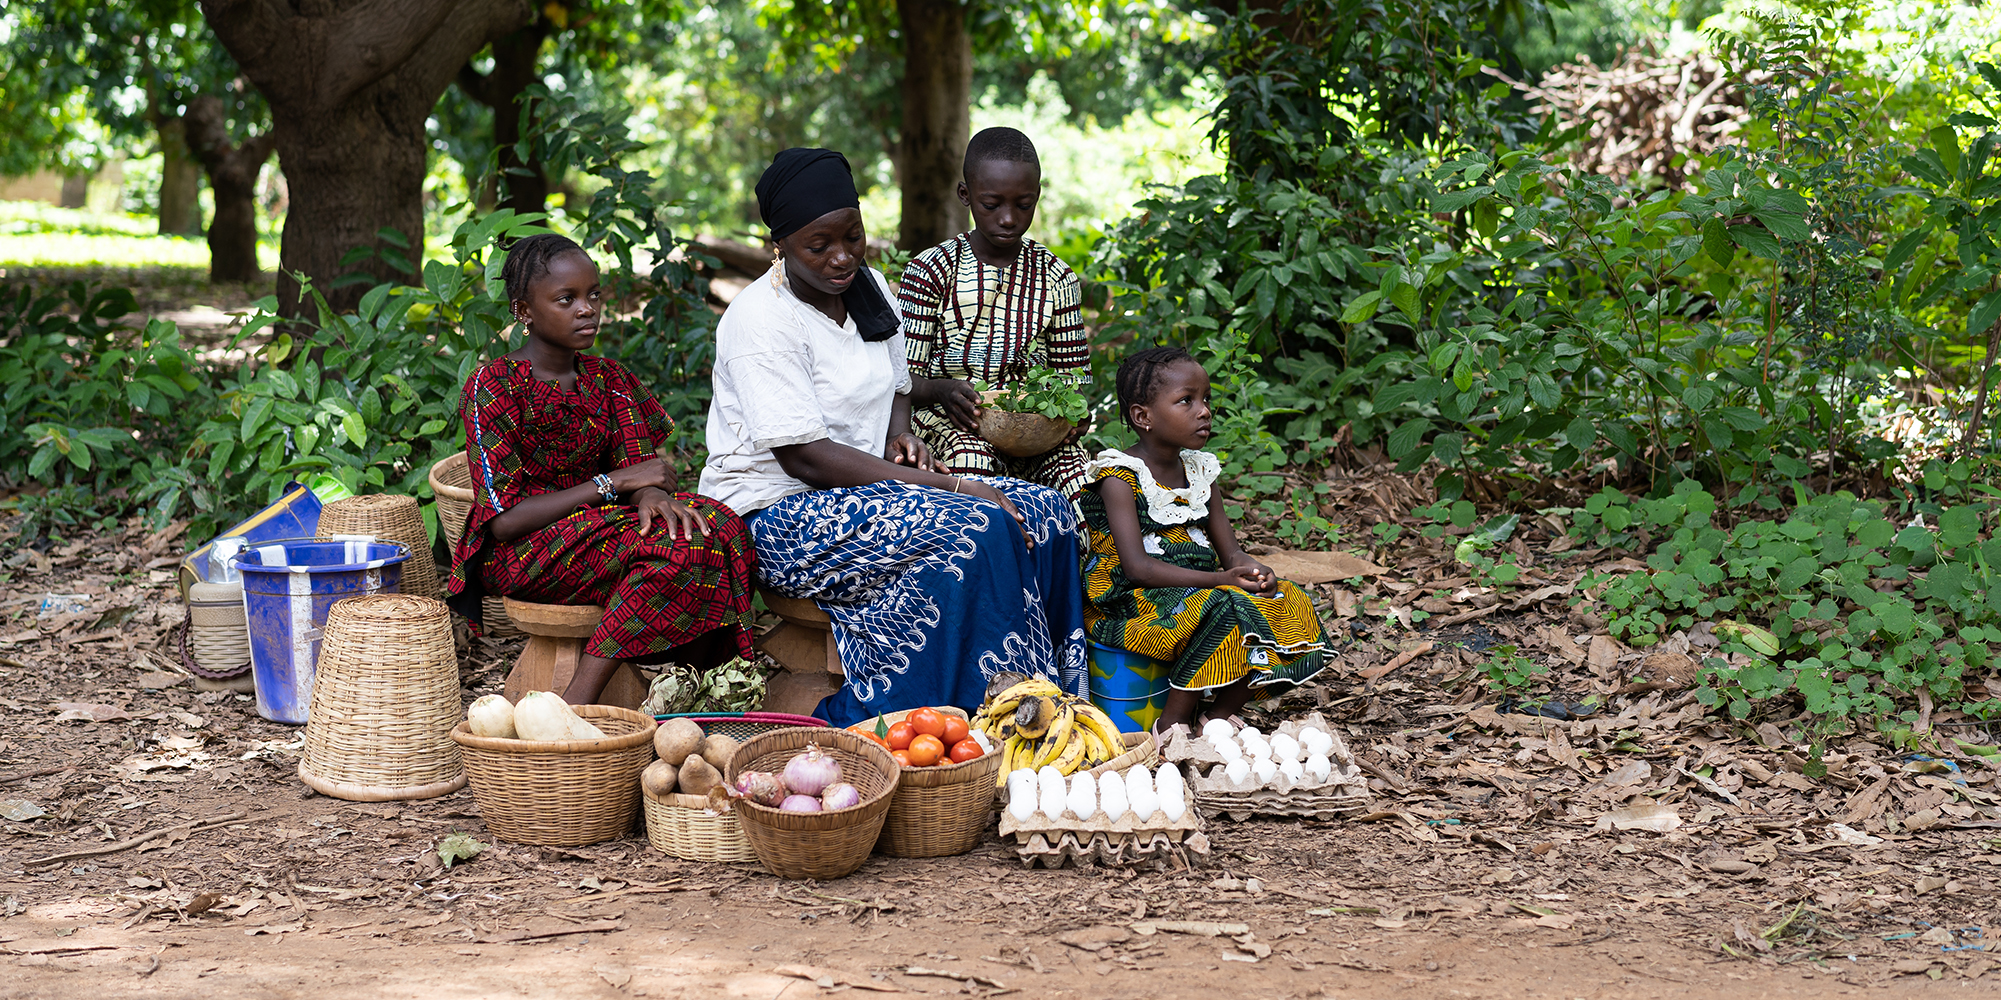 Woman with adolescent girls sit by road selling produce